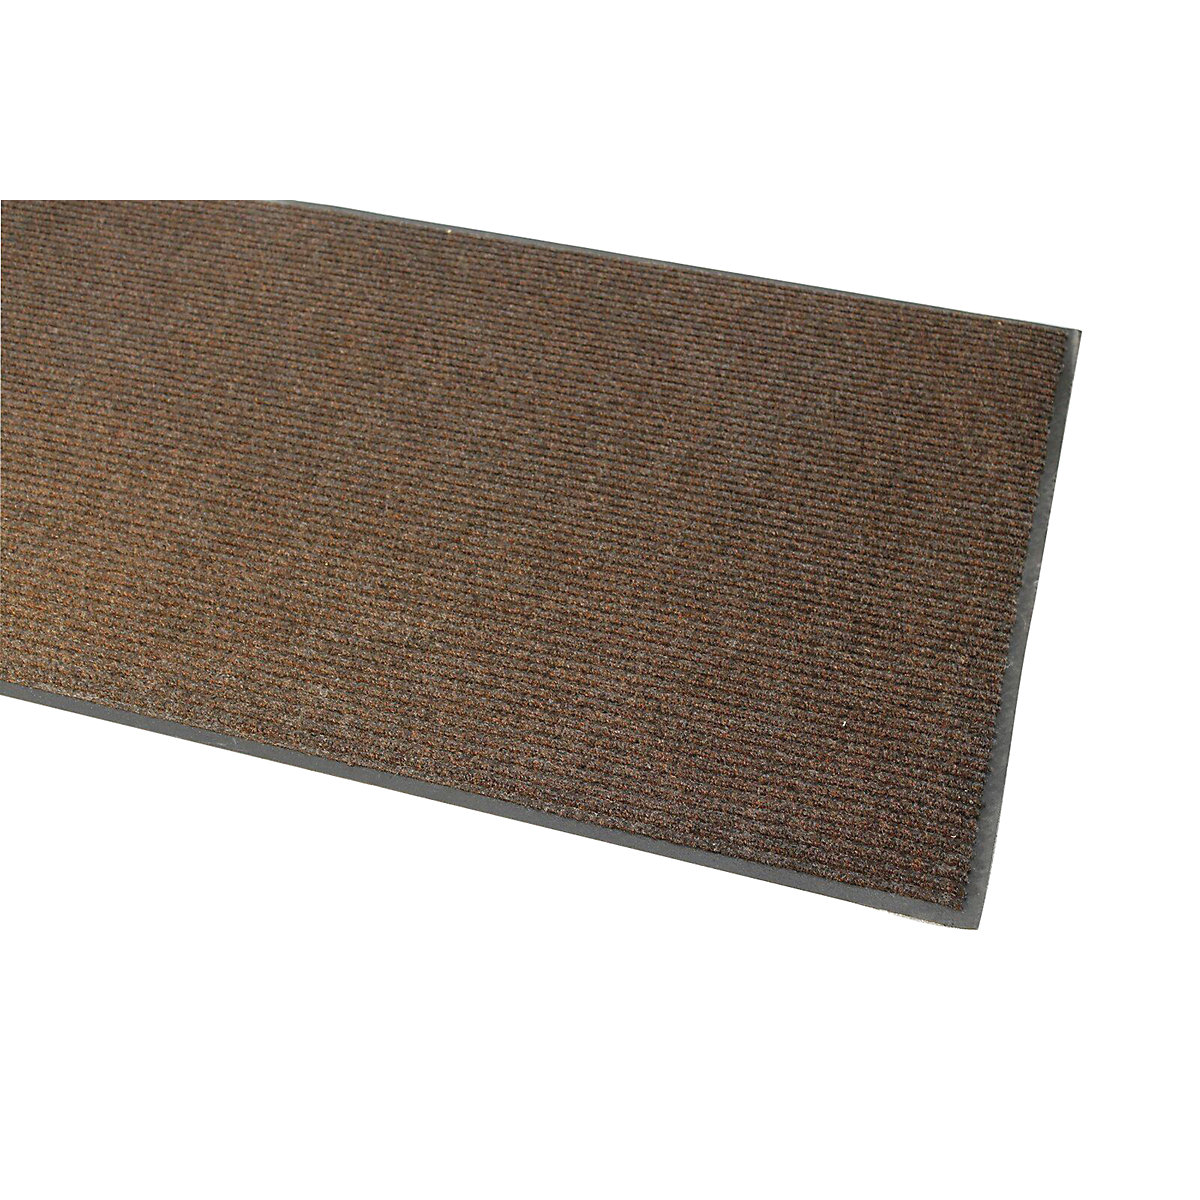 Entrance matting, ribbed – COBA, LxW 1500 x 900 mm, brown-5